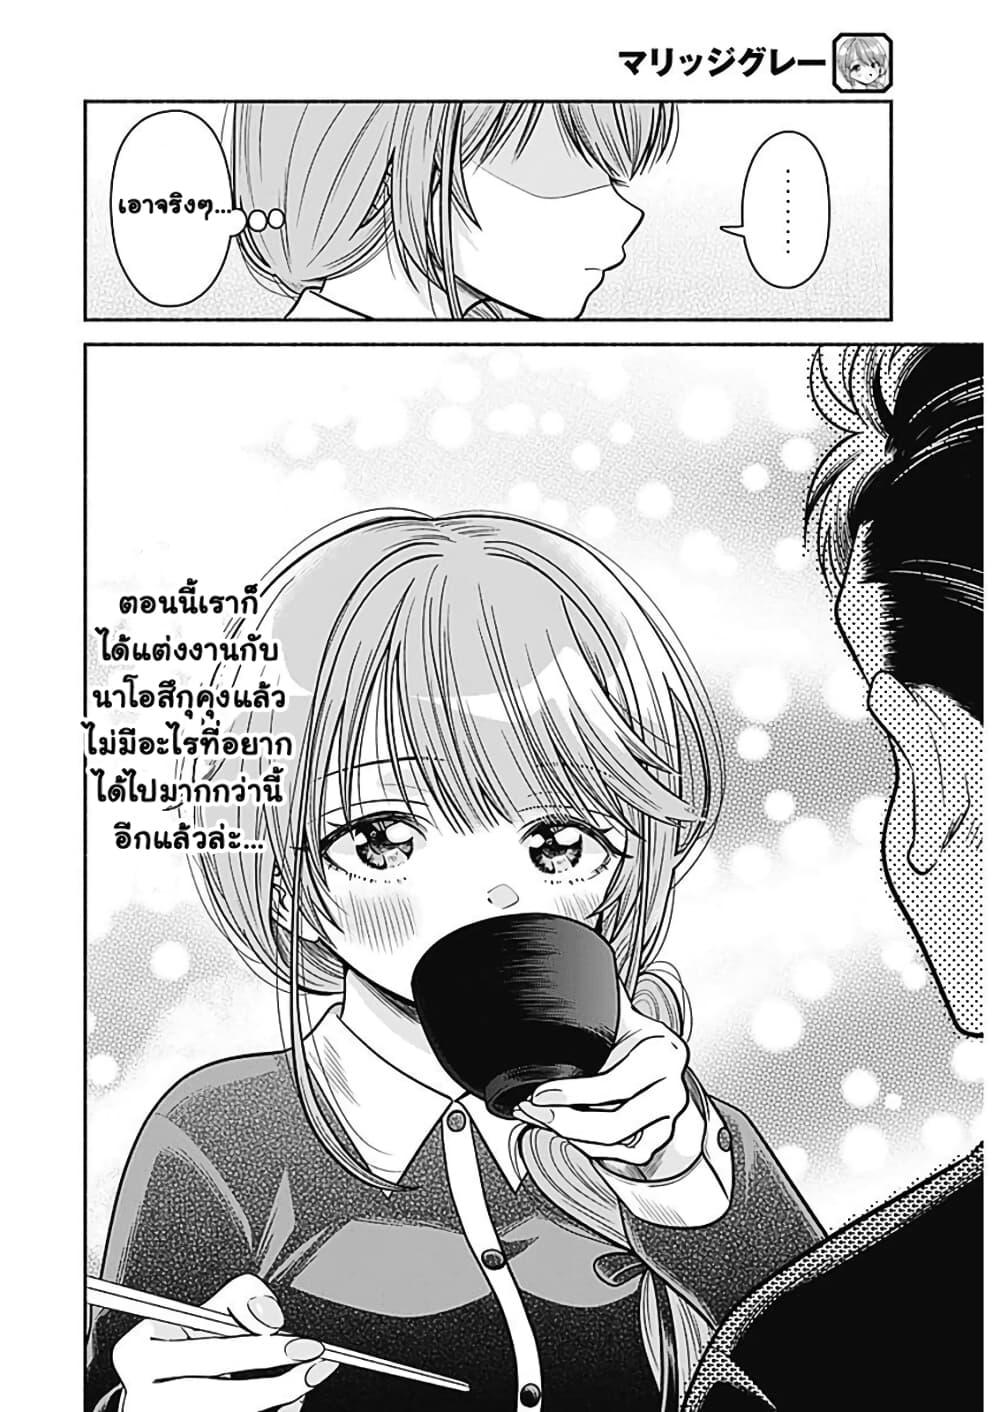 Marriage Gray 3 (8)